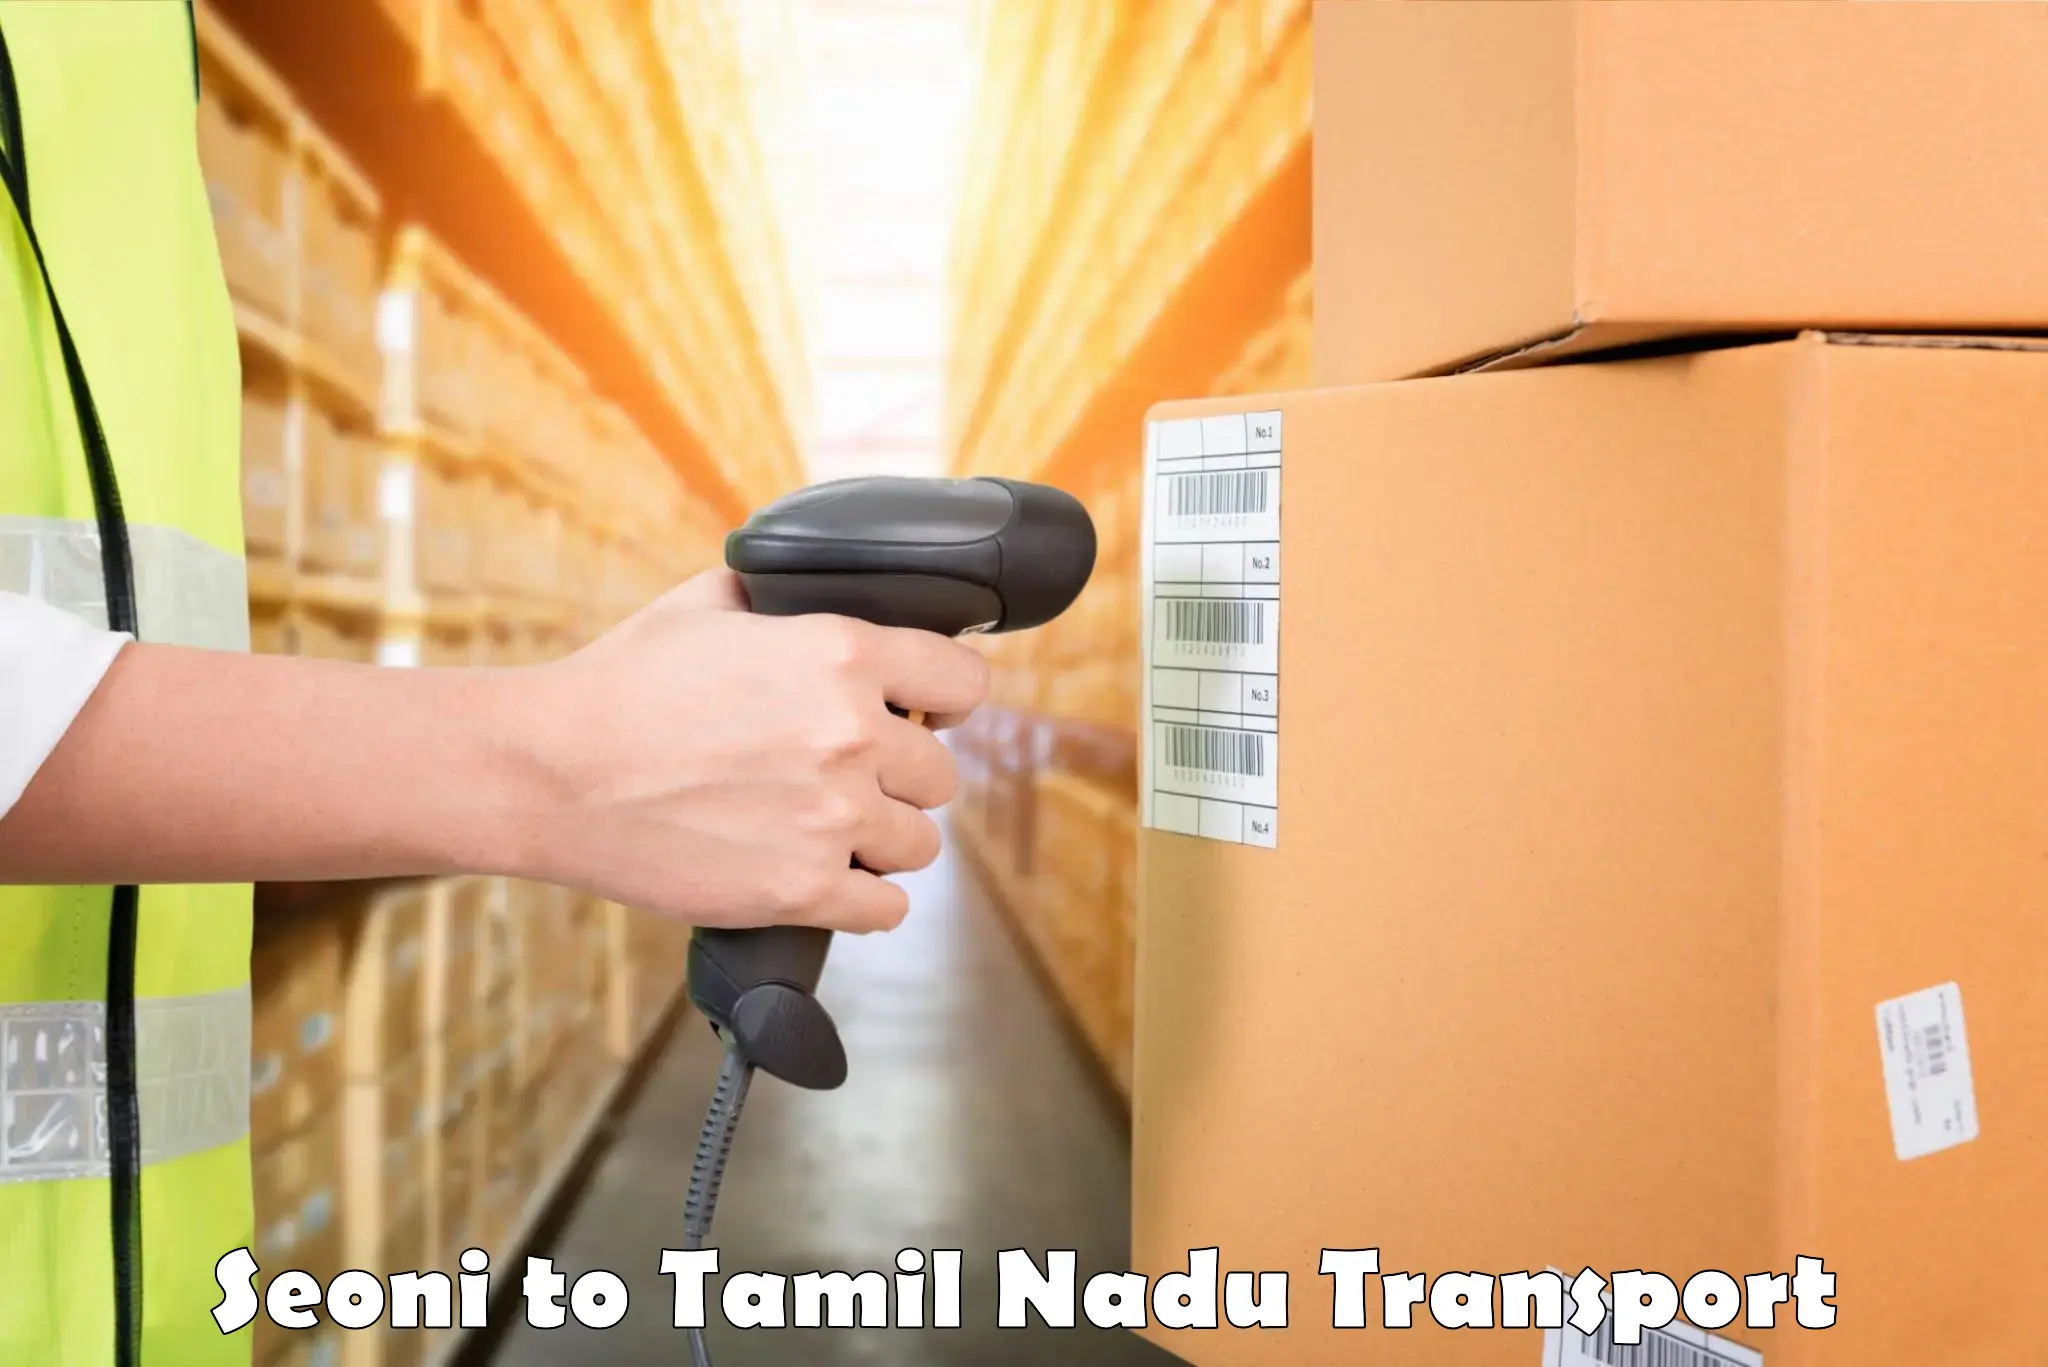 Vehicle transport services Seoni to Ennore Port Chennai